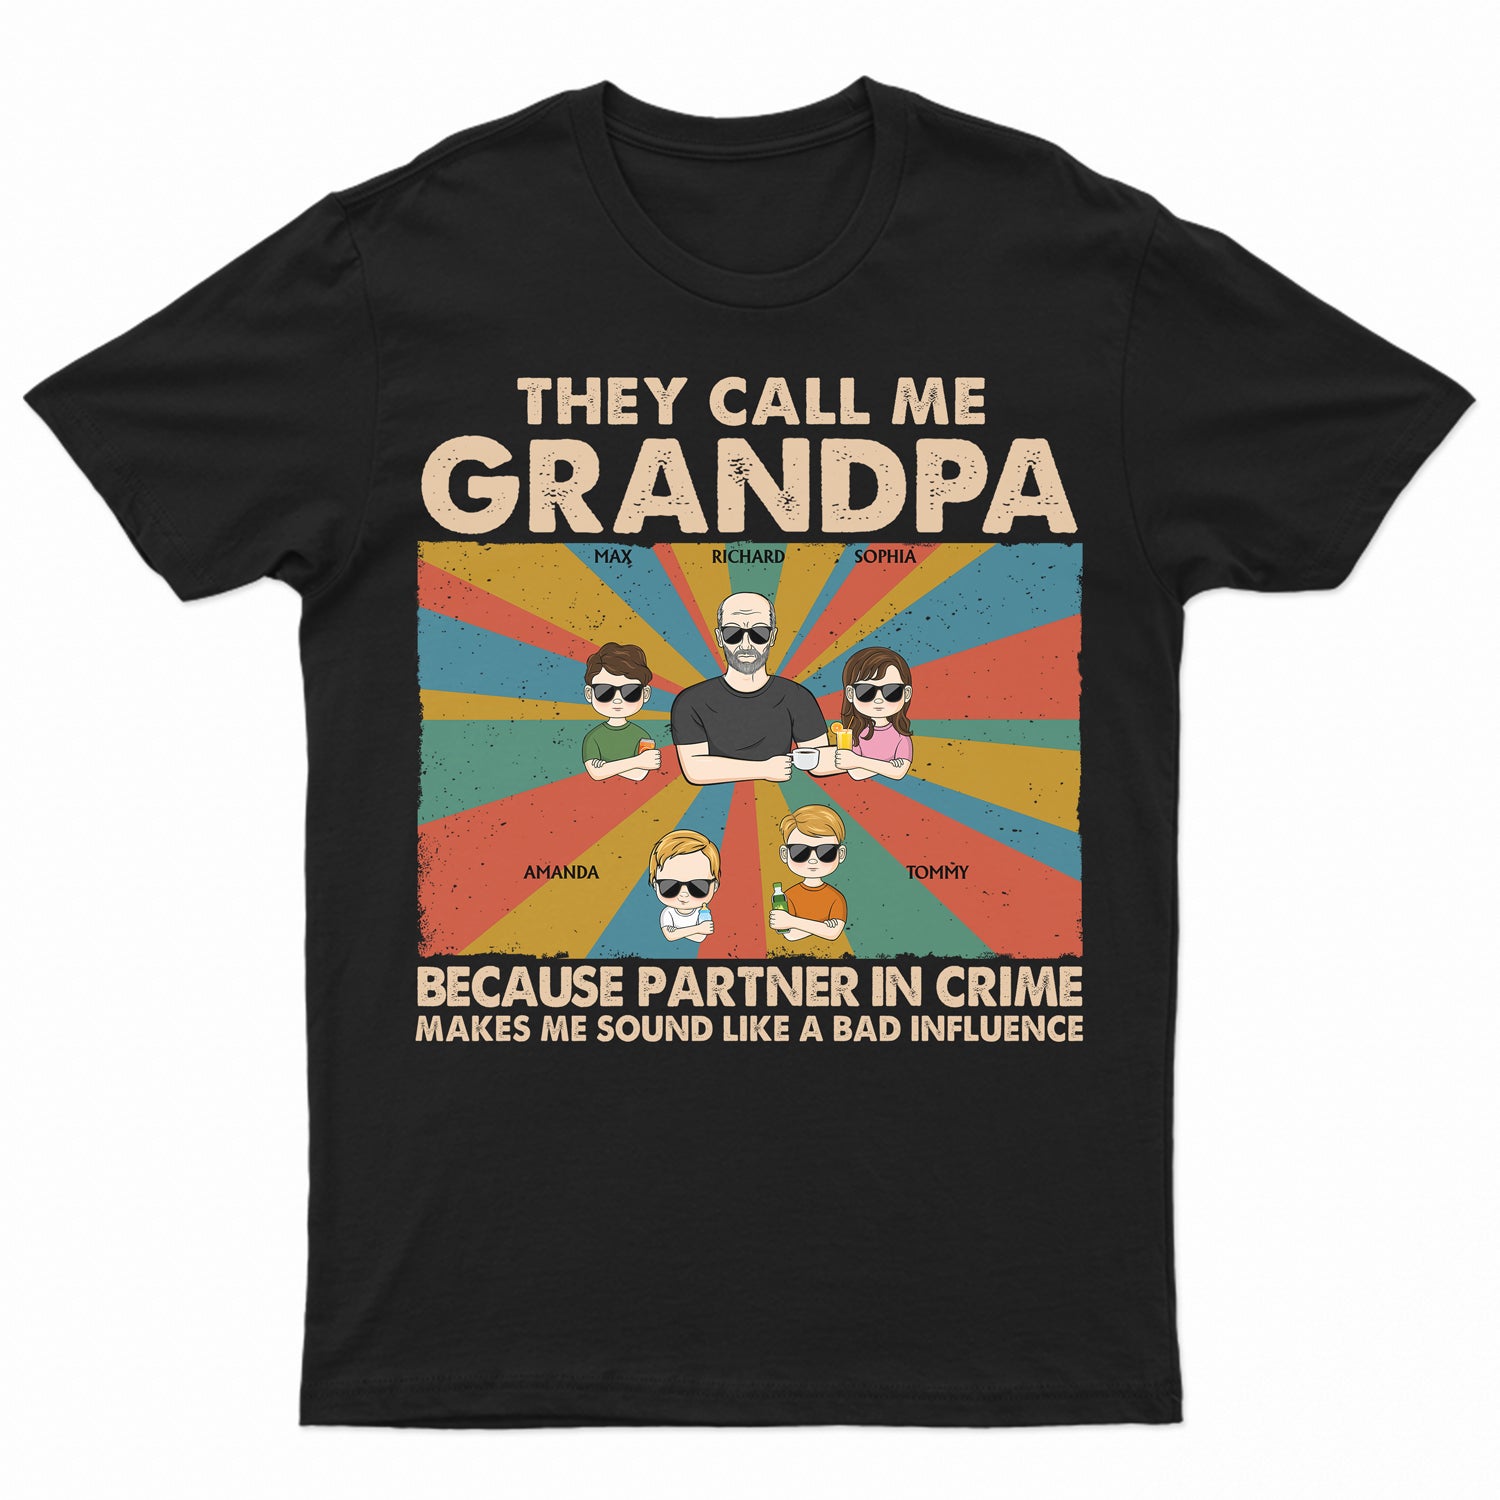 They Call Me Grandpa Because Partner In Crime - Gift For Father, Parents, Family, Grandparent, Grandfather - Personalized Custom T Shirt